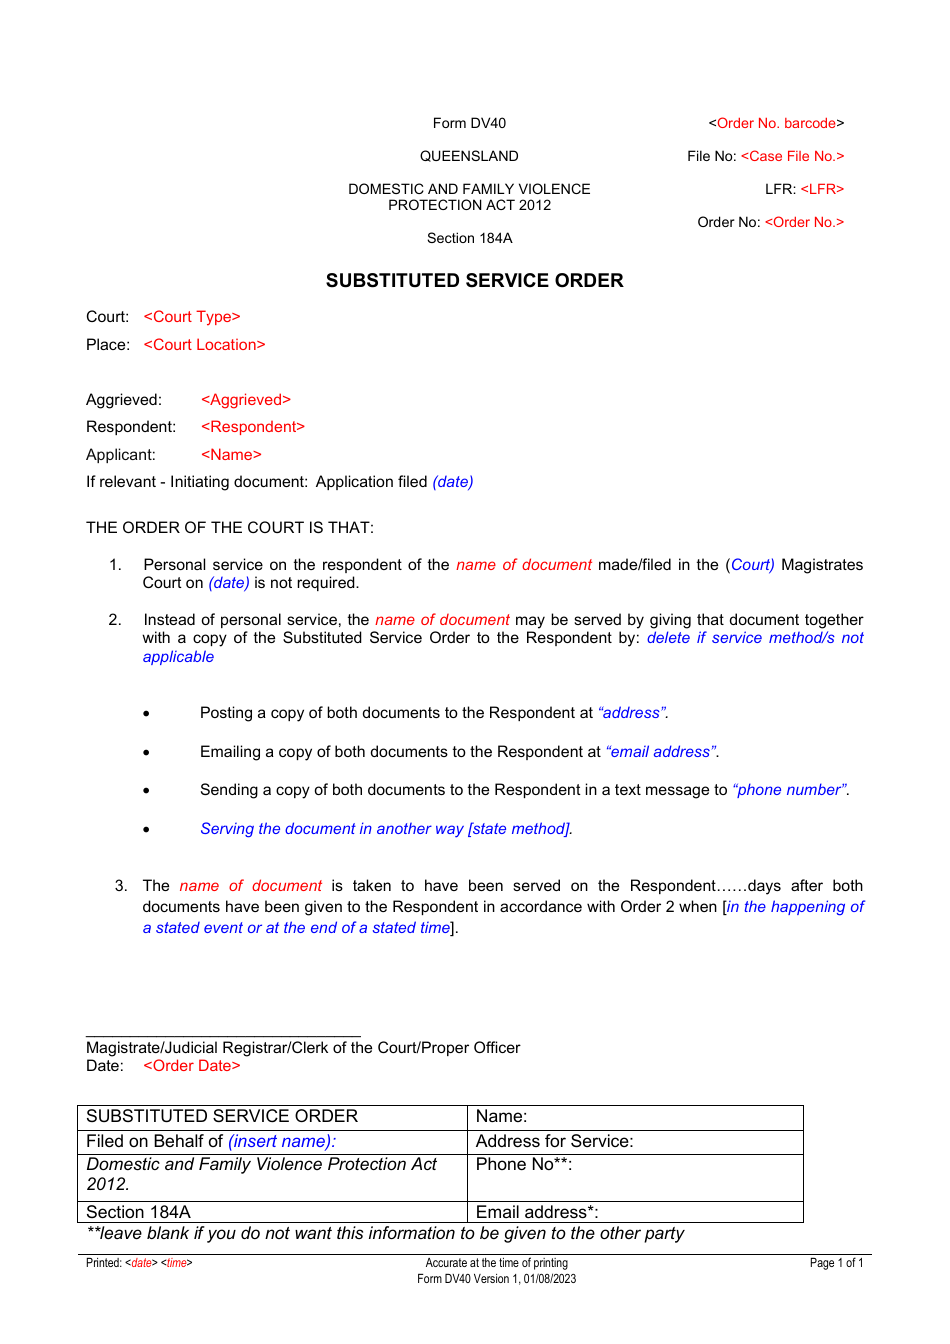 Form DV40 Substituted Service Order - Queensland, Australia, Page 1